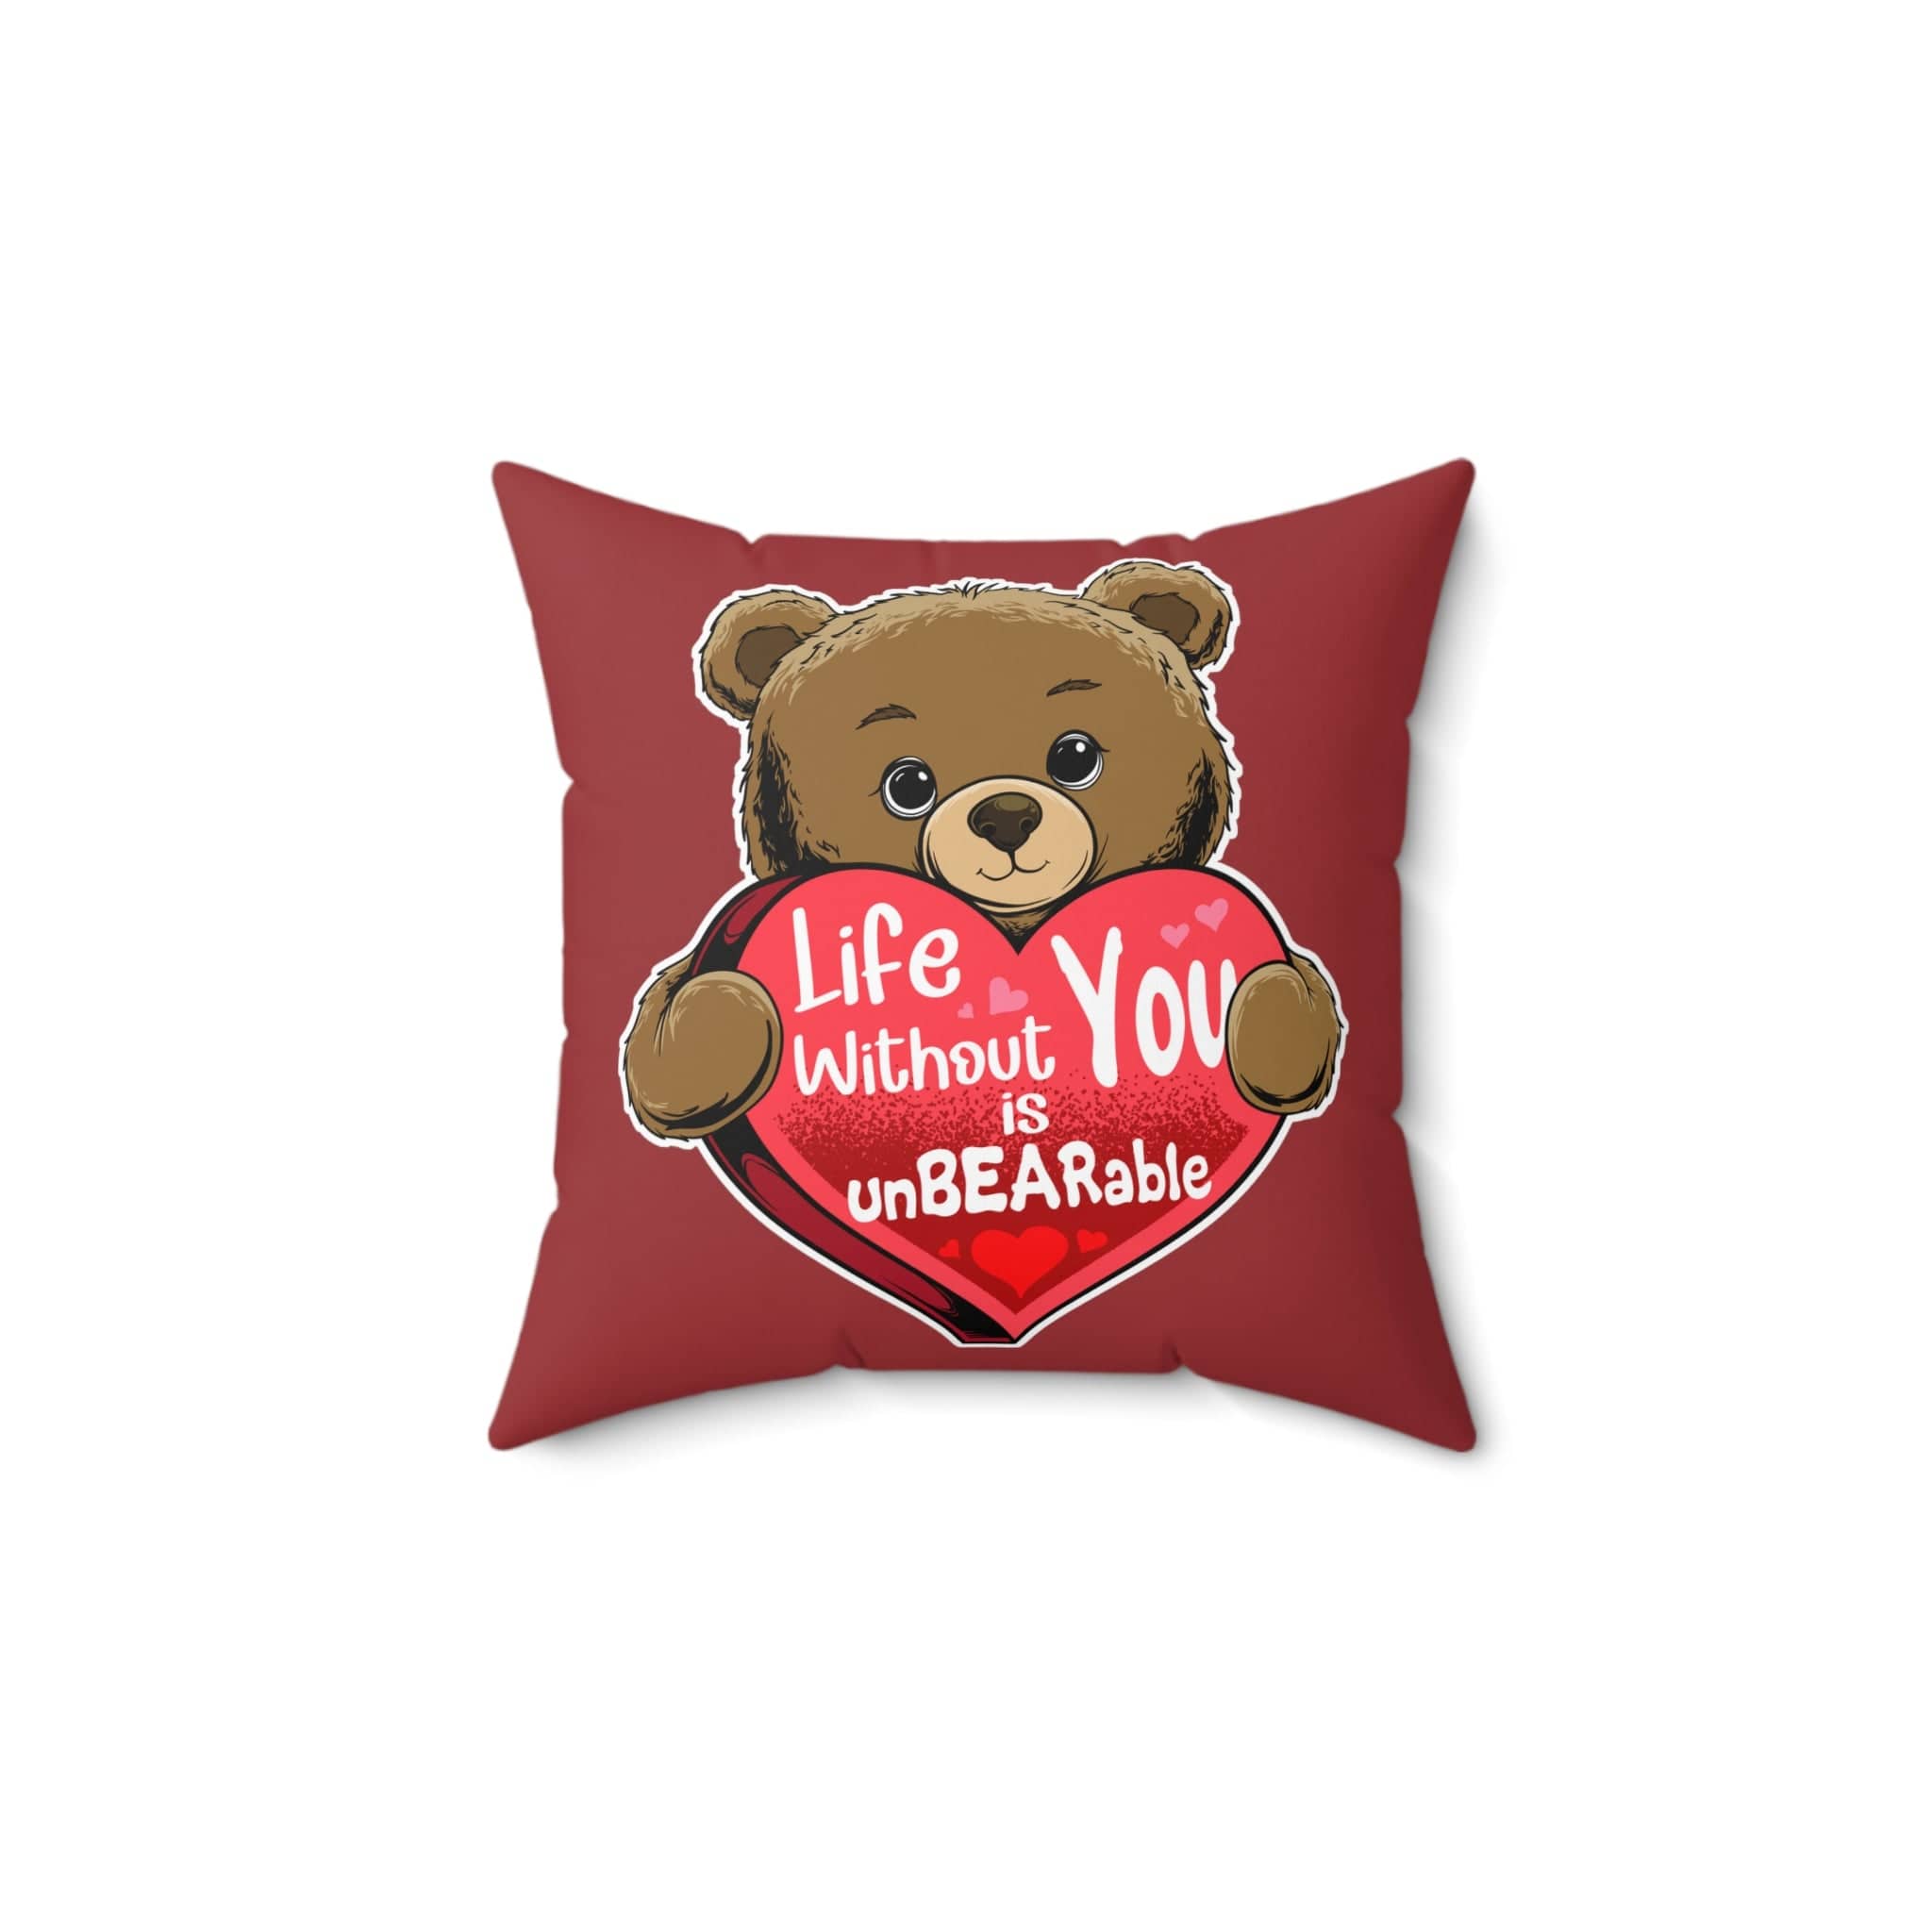 Life Without You Is UnBEARable Pillow color: Stiletto